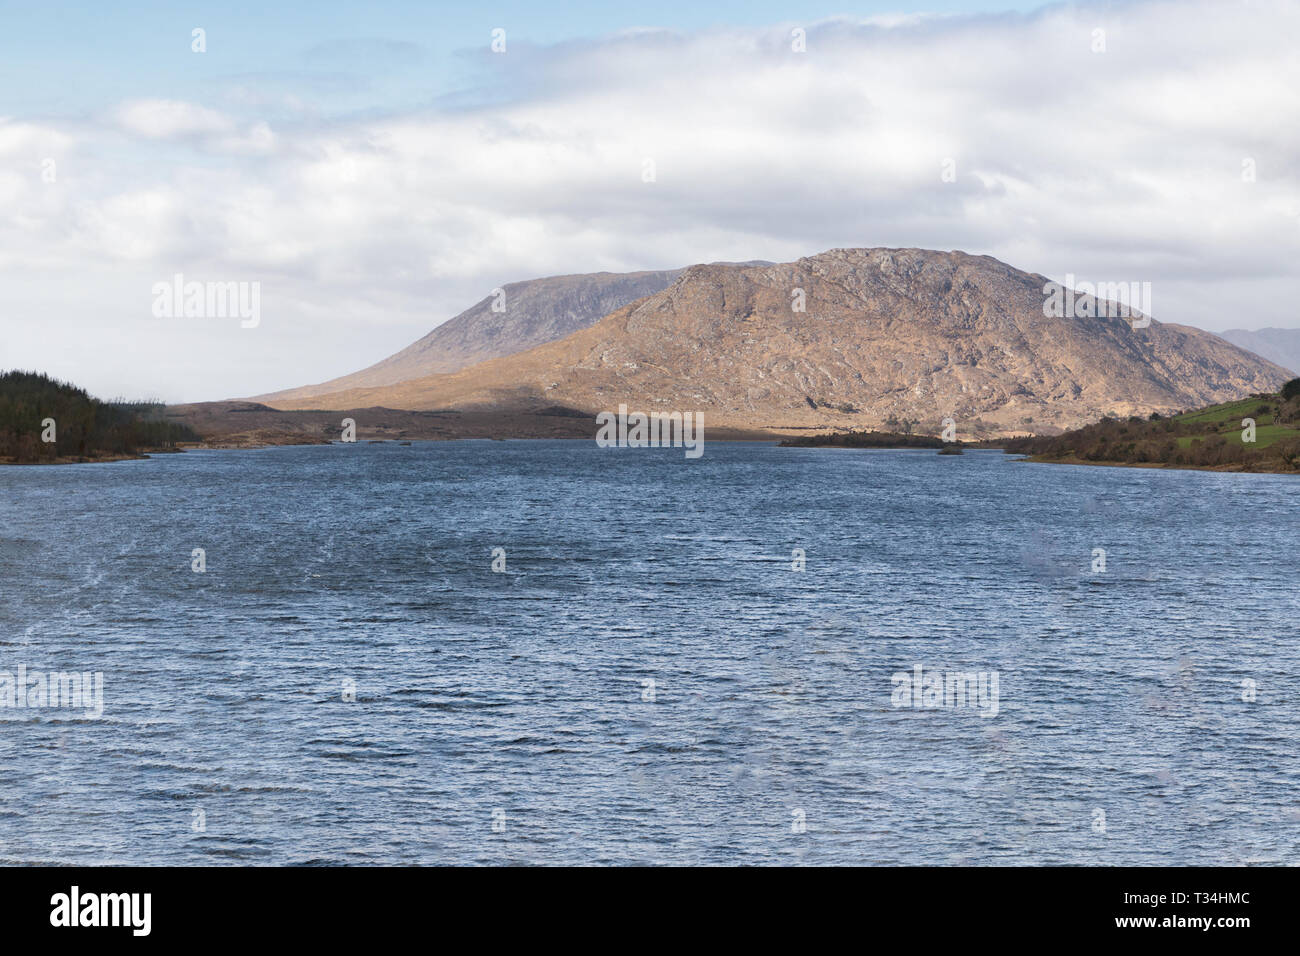 Mountain, lake and vegetation at Western way trail in Lough Corrib, Maam Cross, Galway, Ireland Stock Photo